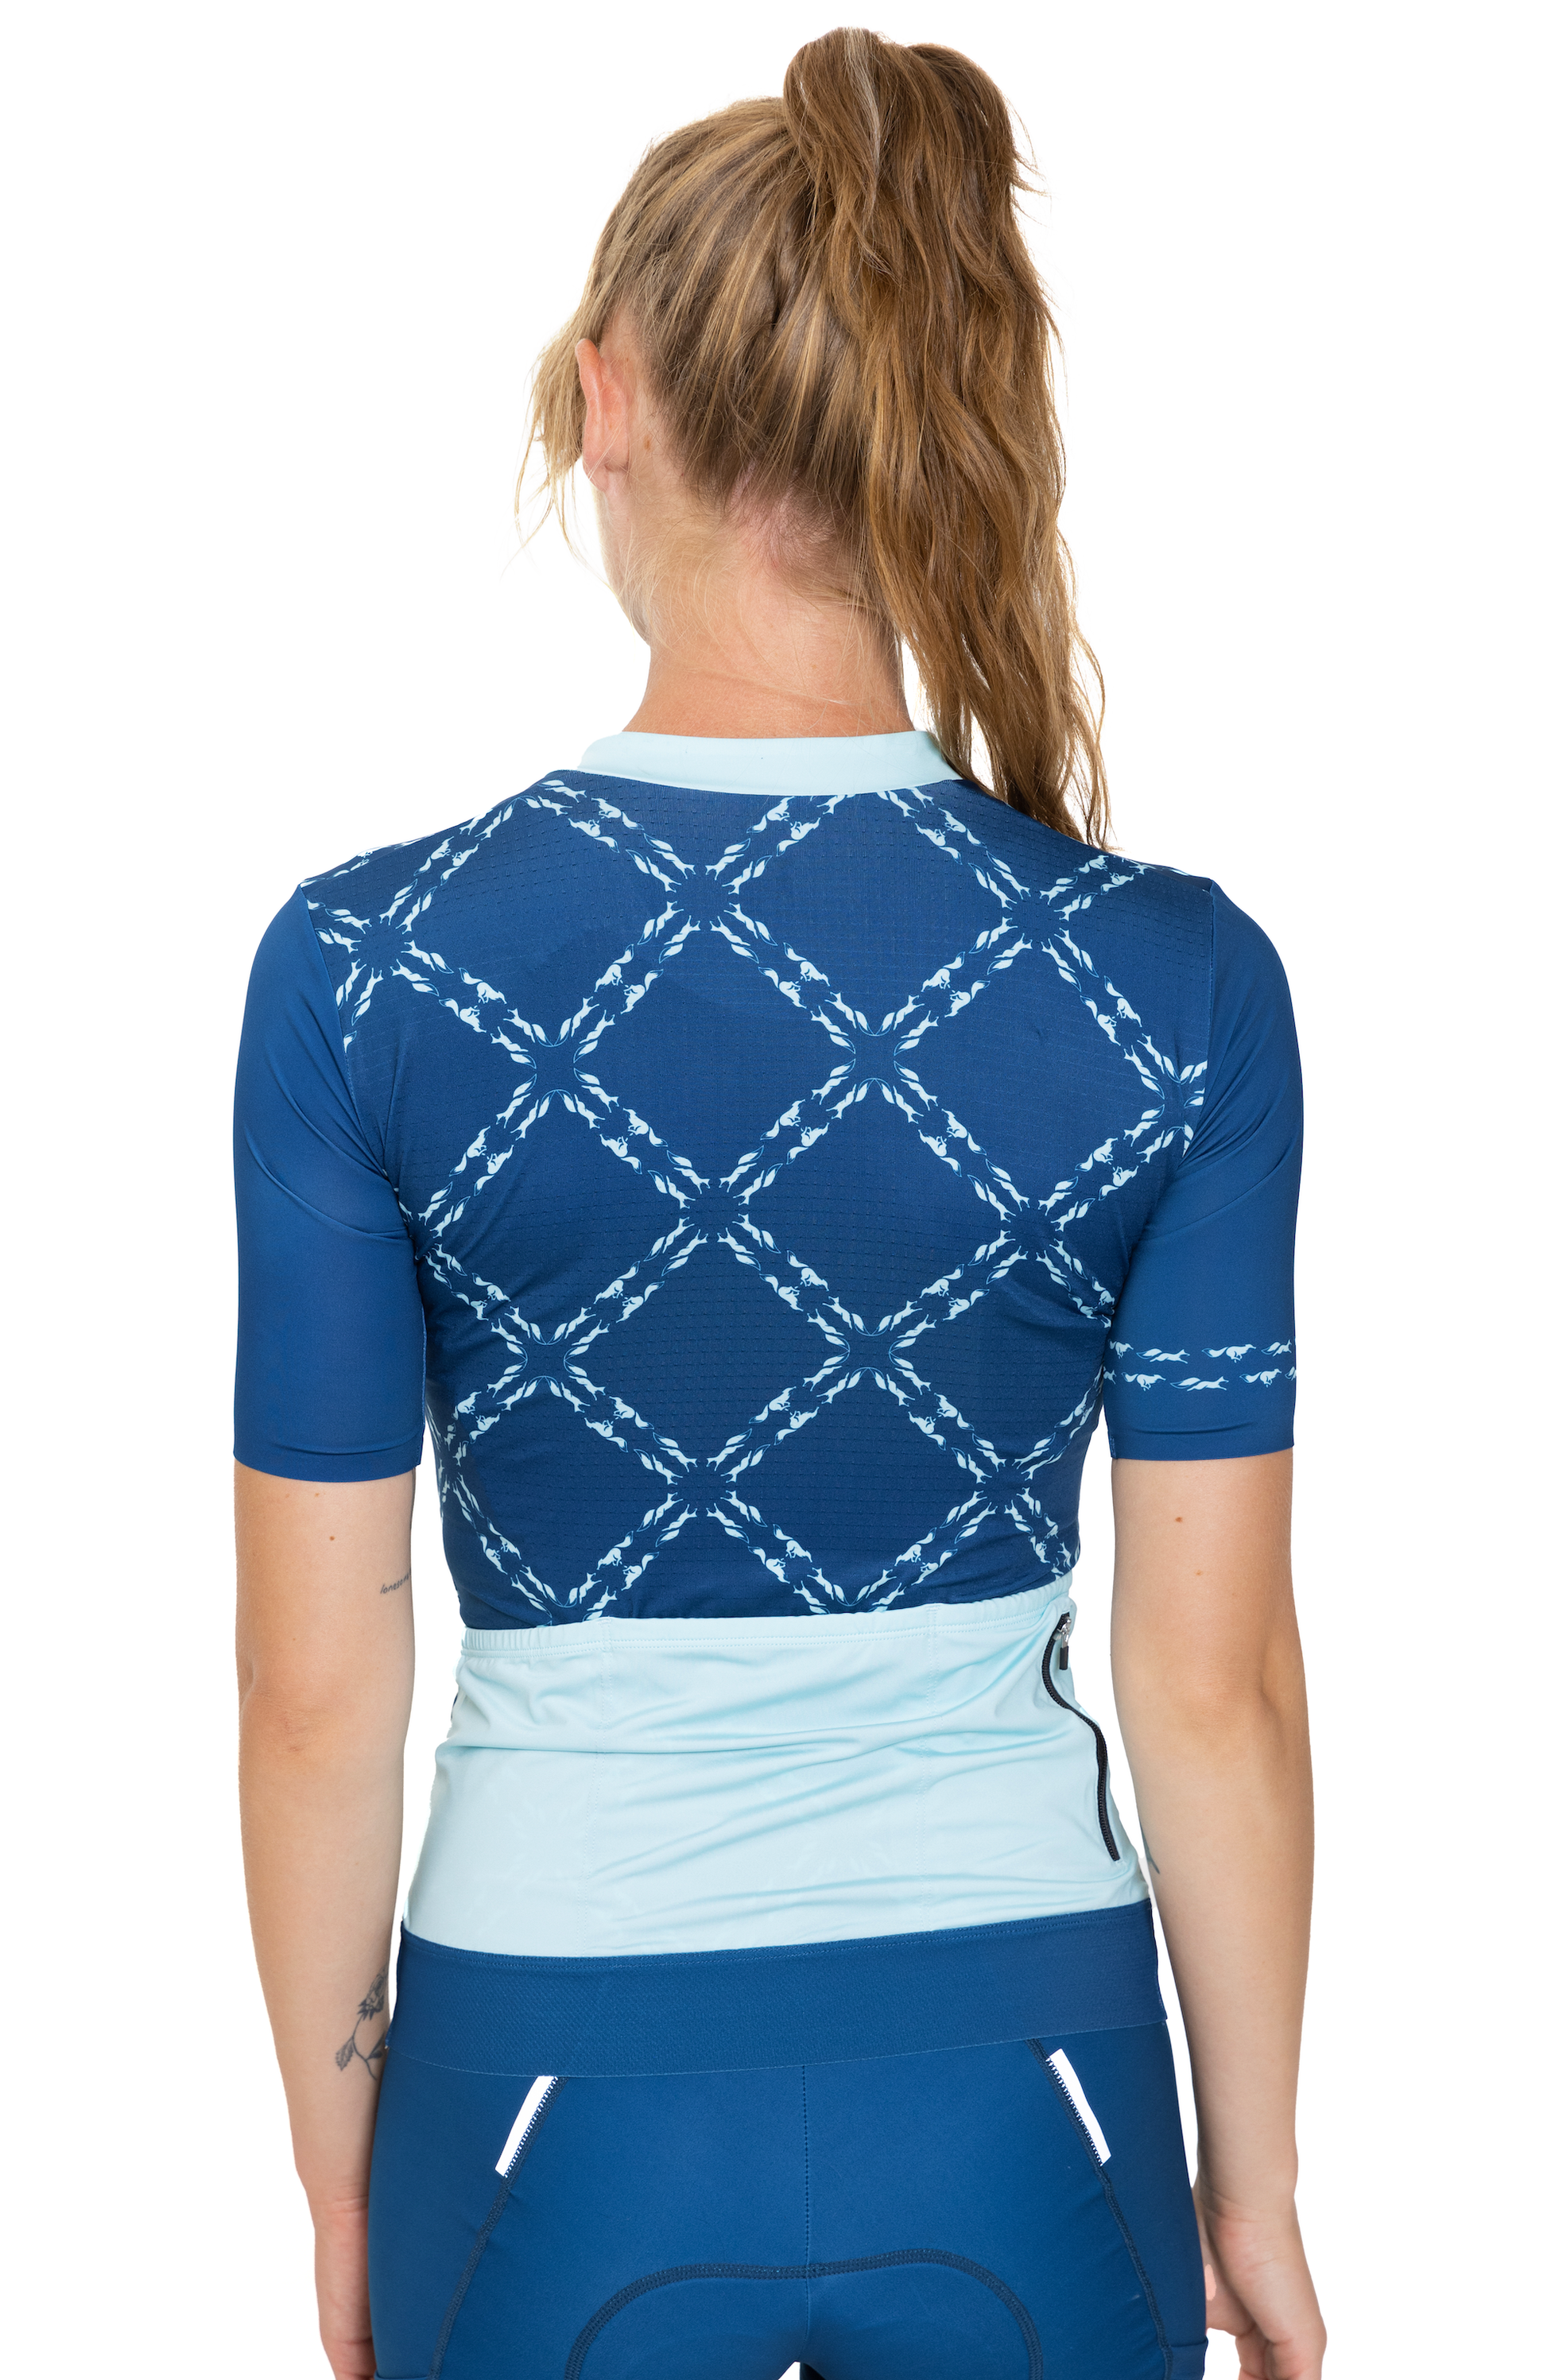 Coeur Sports Cycling Jersey Fleet Foxes Cycling Jersey